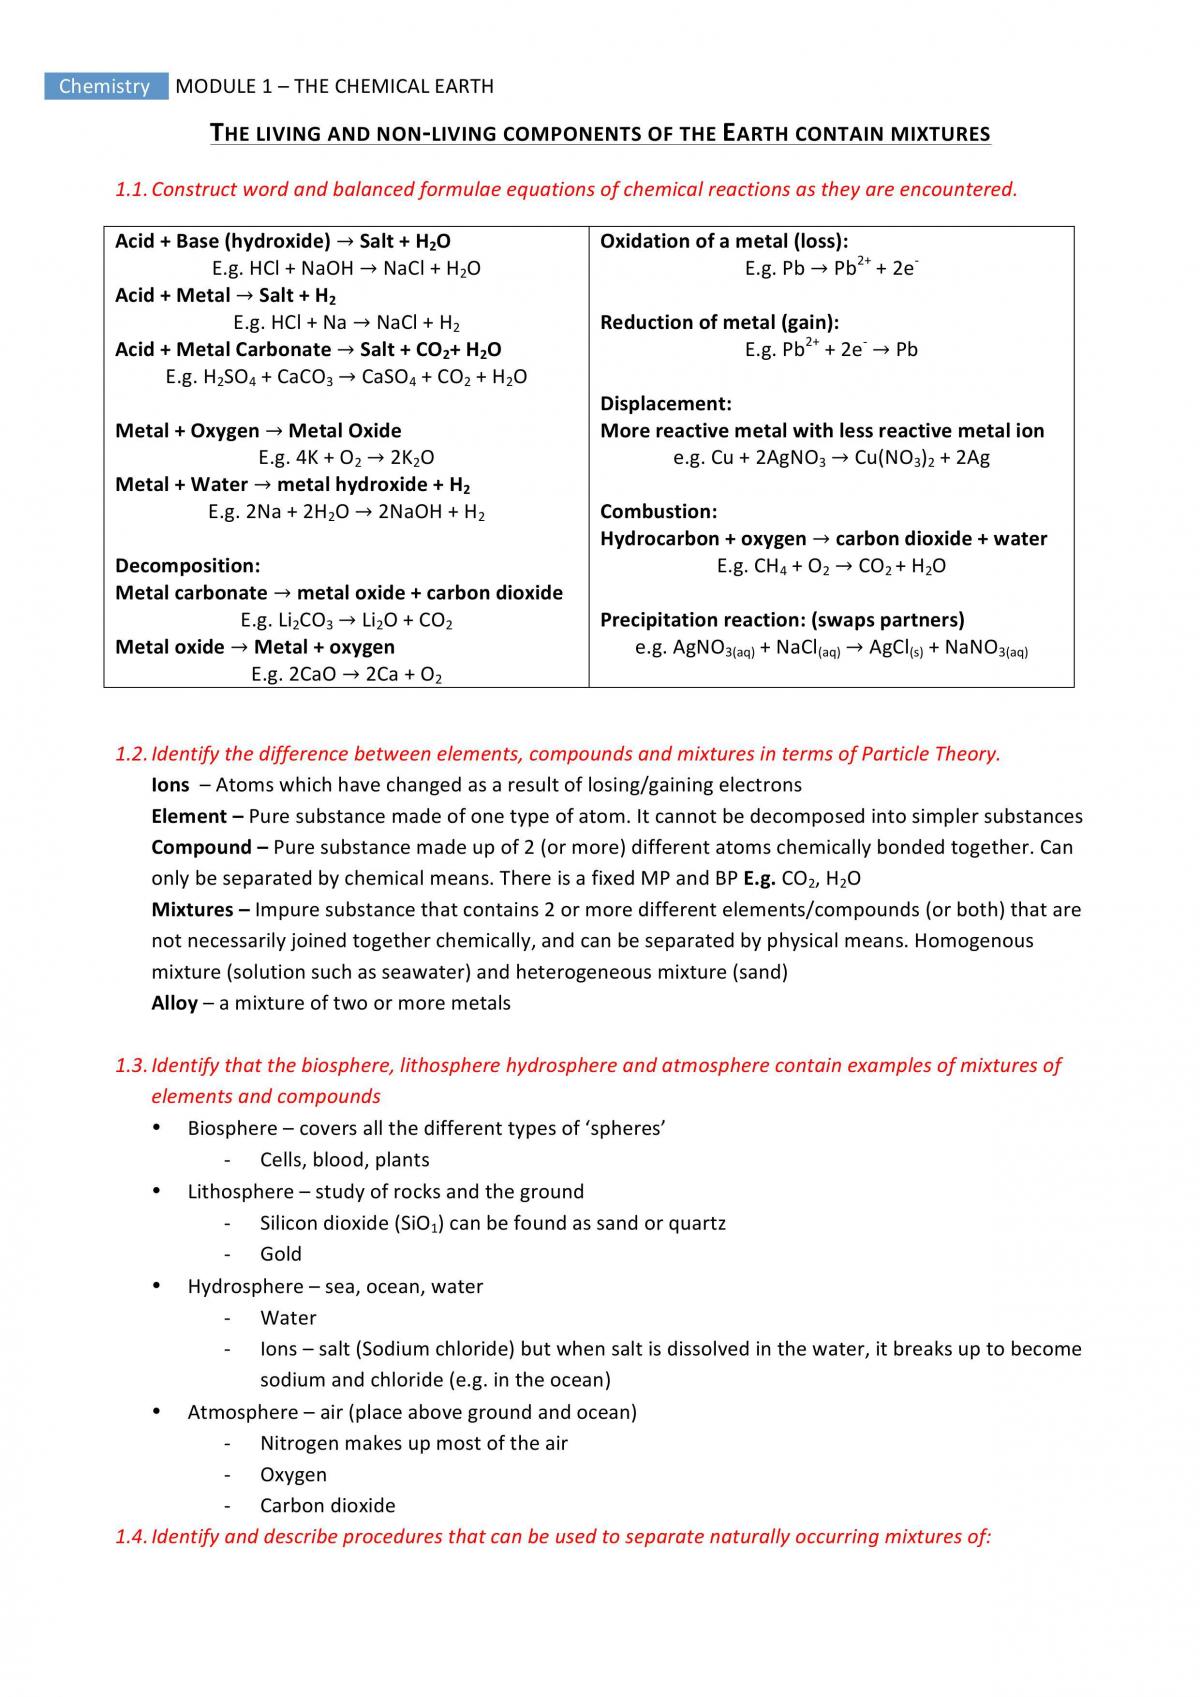 The Chemical Earth Complete Notes  - Page 1